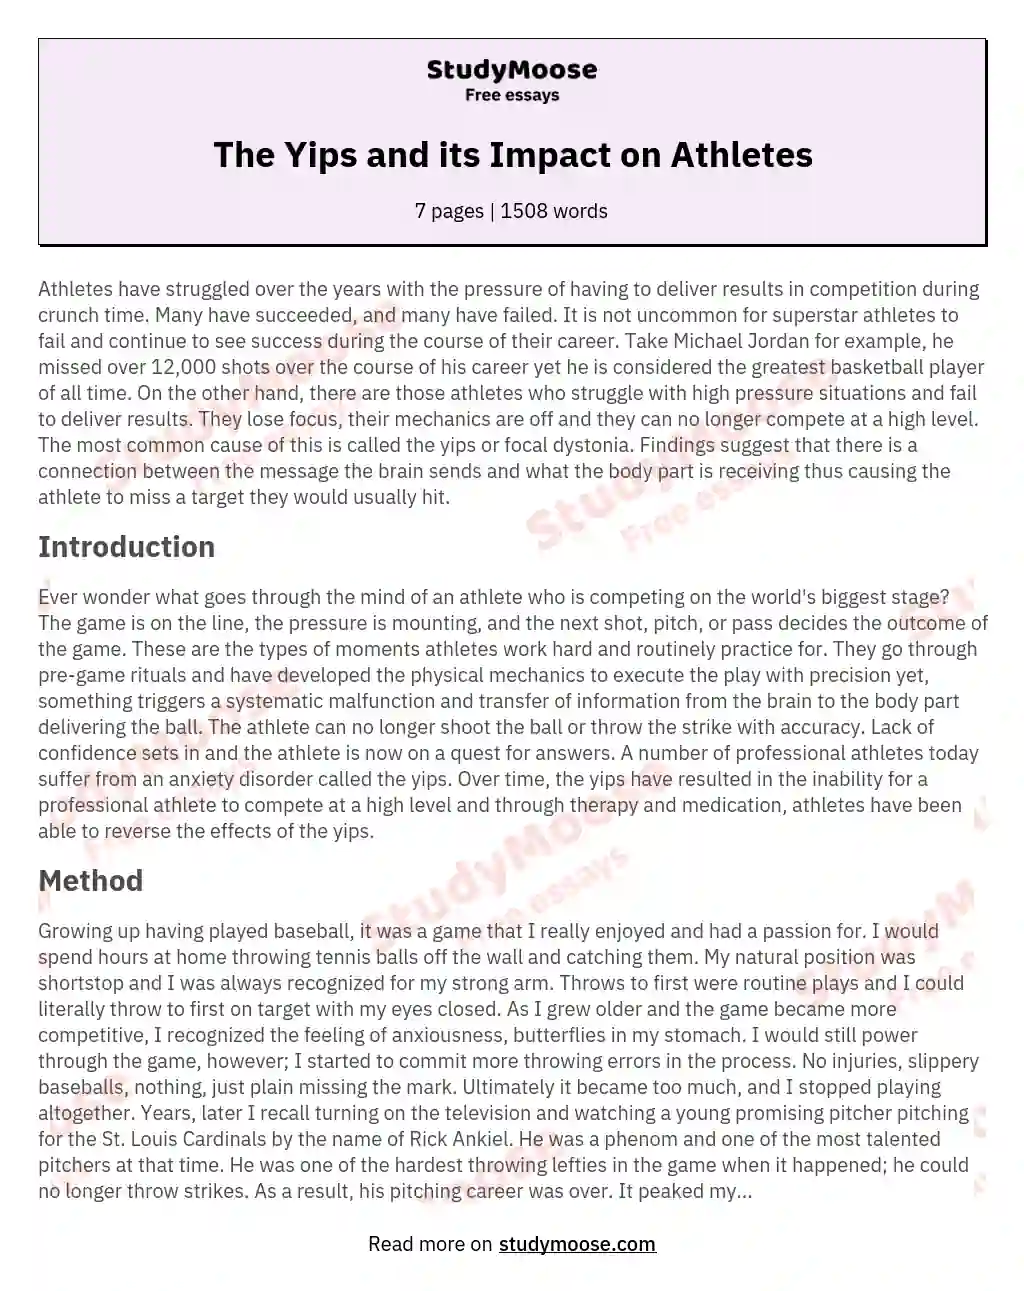 The Yips and its Impact on Athletes essay